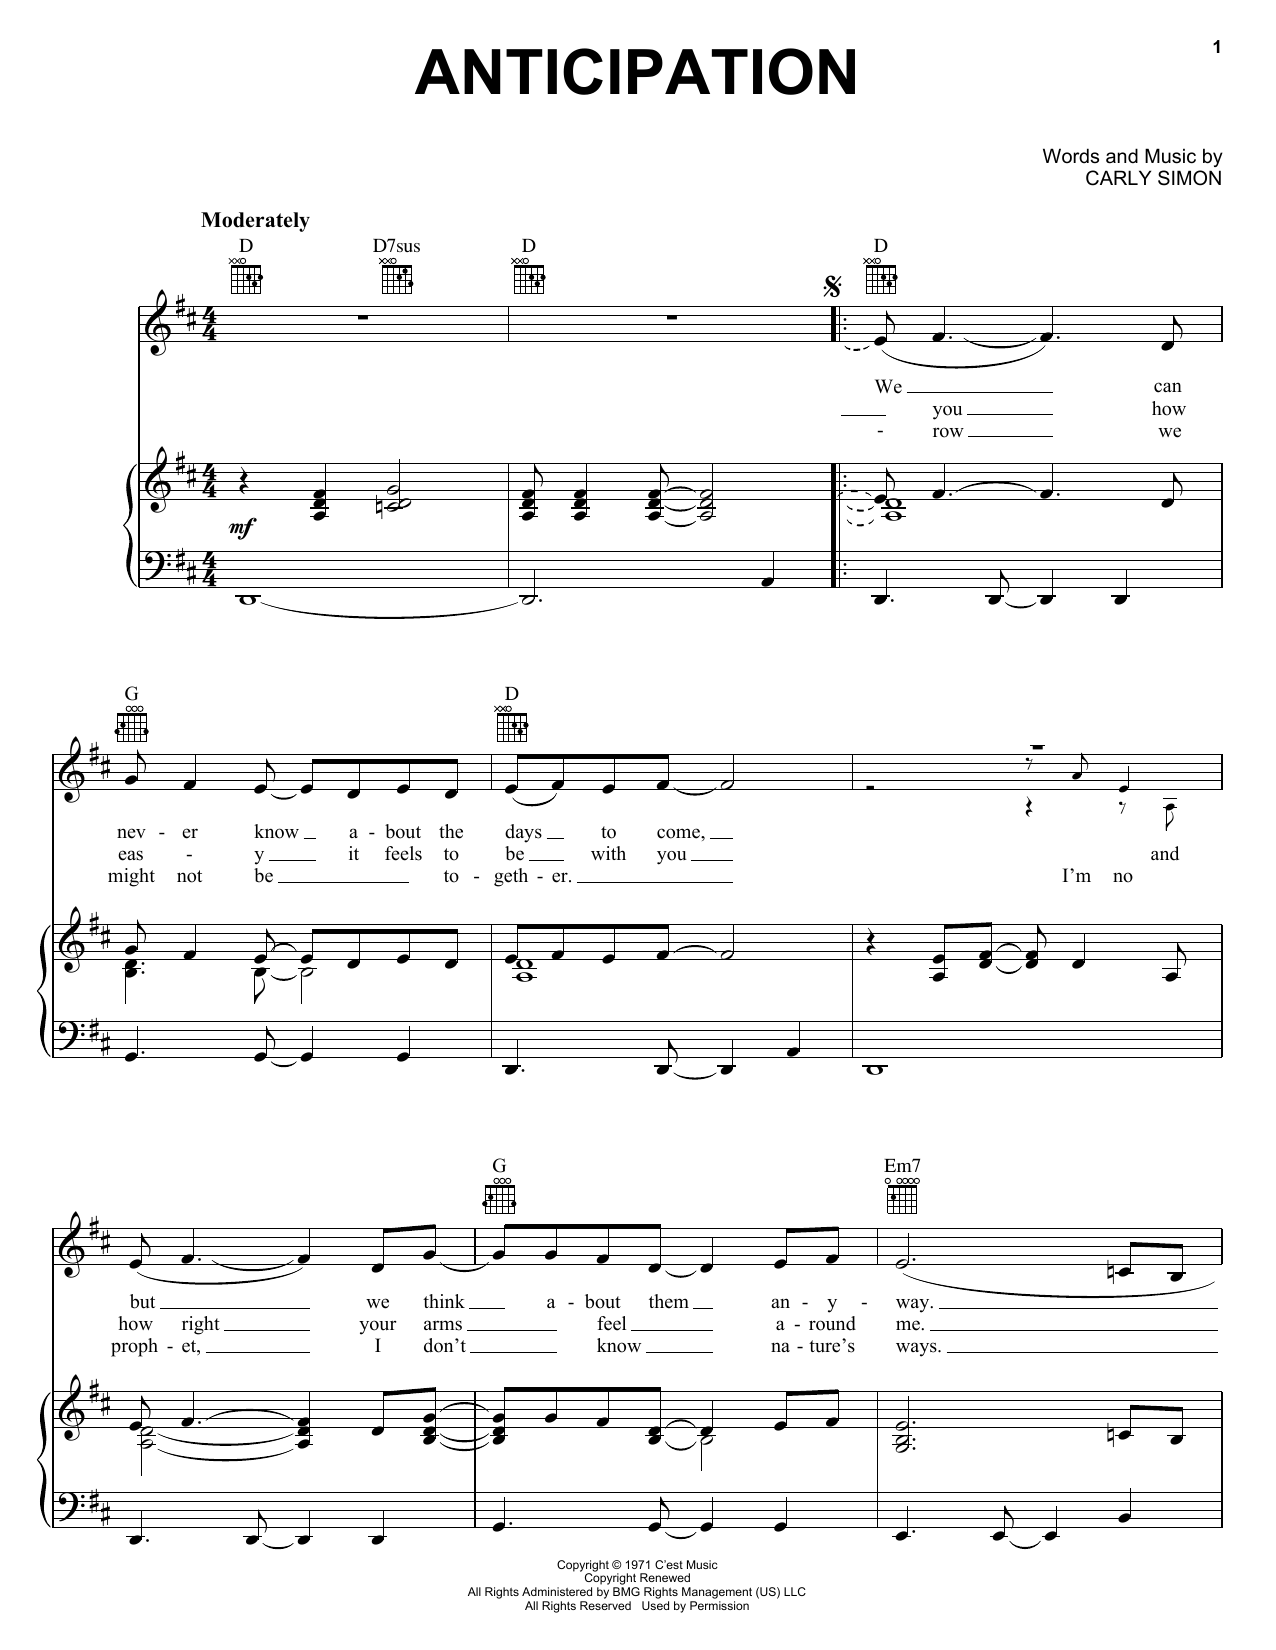 Carly Simon Anticipation sheet music notes and chords. Download Printable PDF.